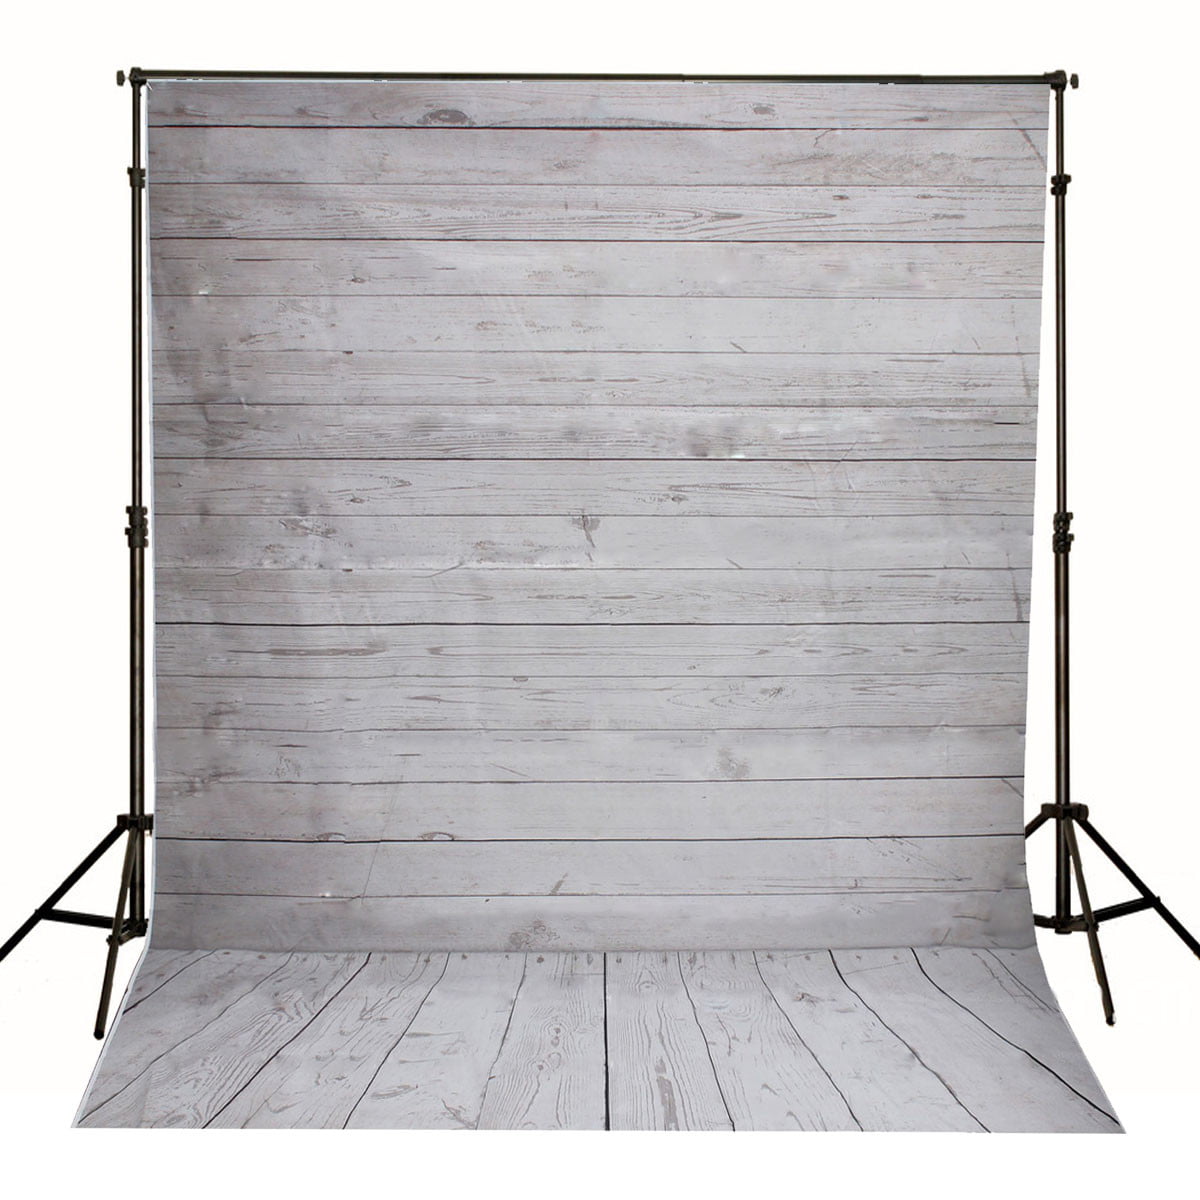 Kate 10x10ft White Wood Backdrops for Photography Shiplap Wood Portrait Photo Booth Backdrop Studio Props 